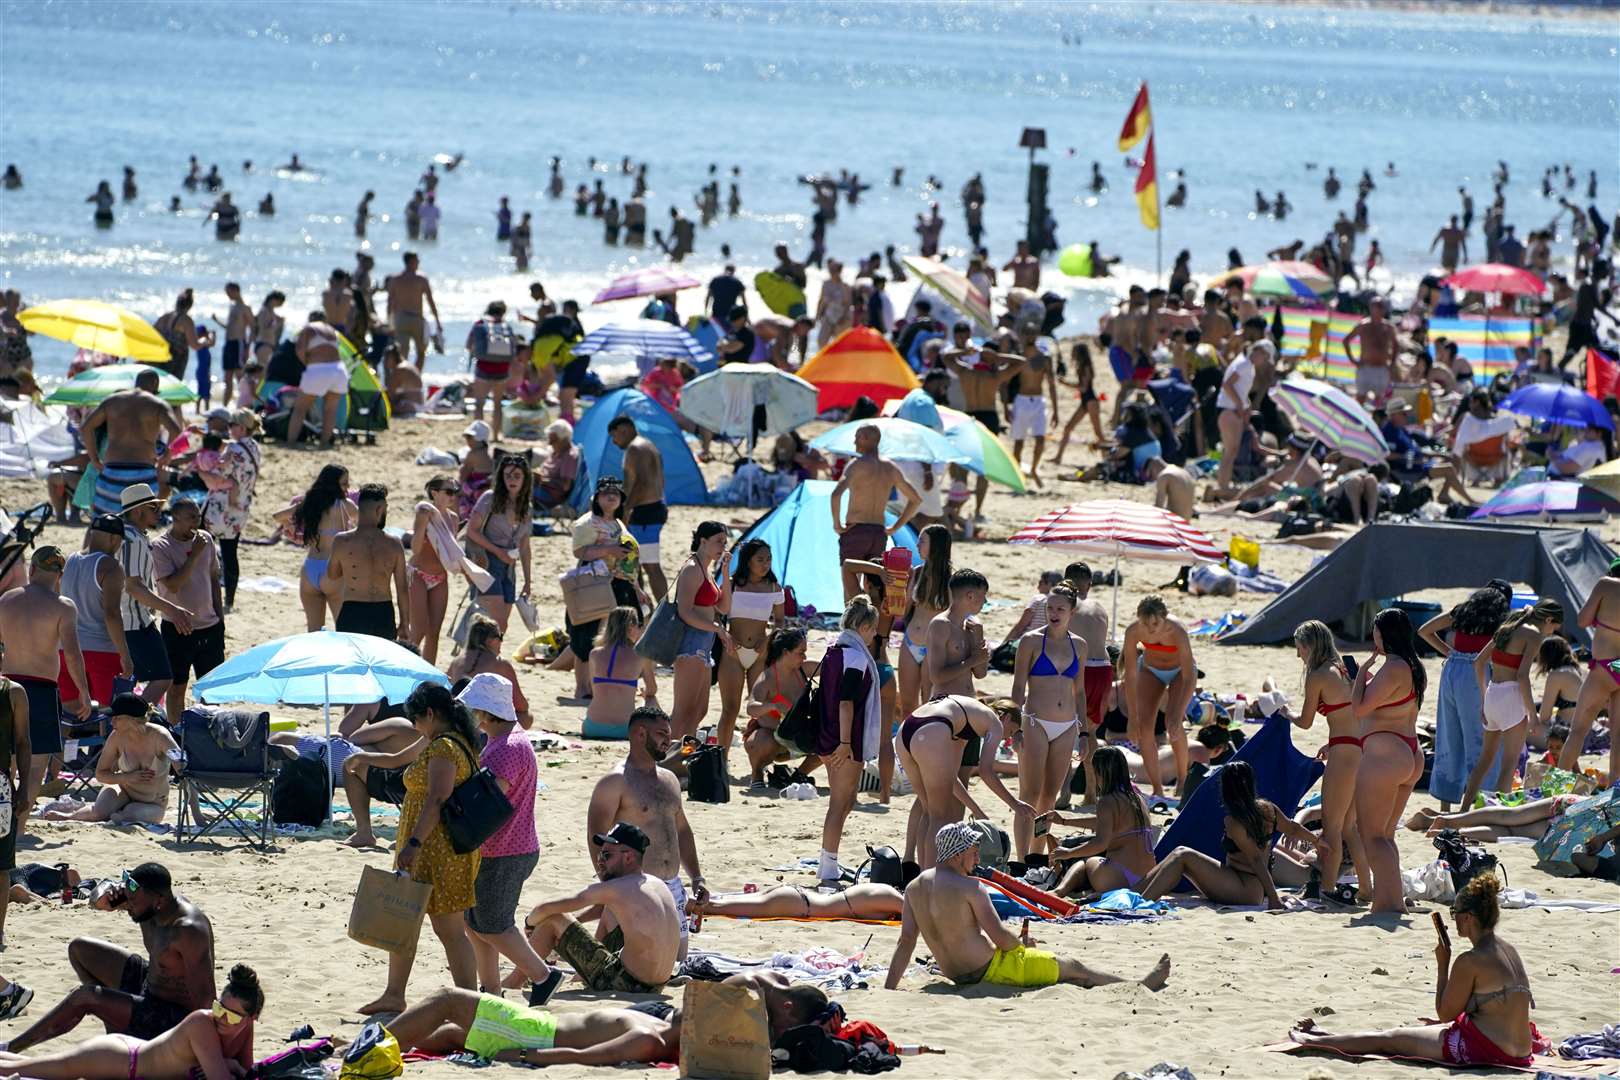 People on the beach in Bournemouth during the hot weather on June 14. (Steve Parsons/PA)